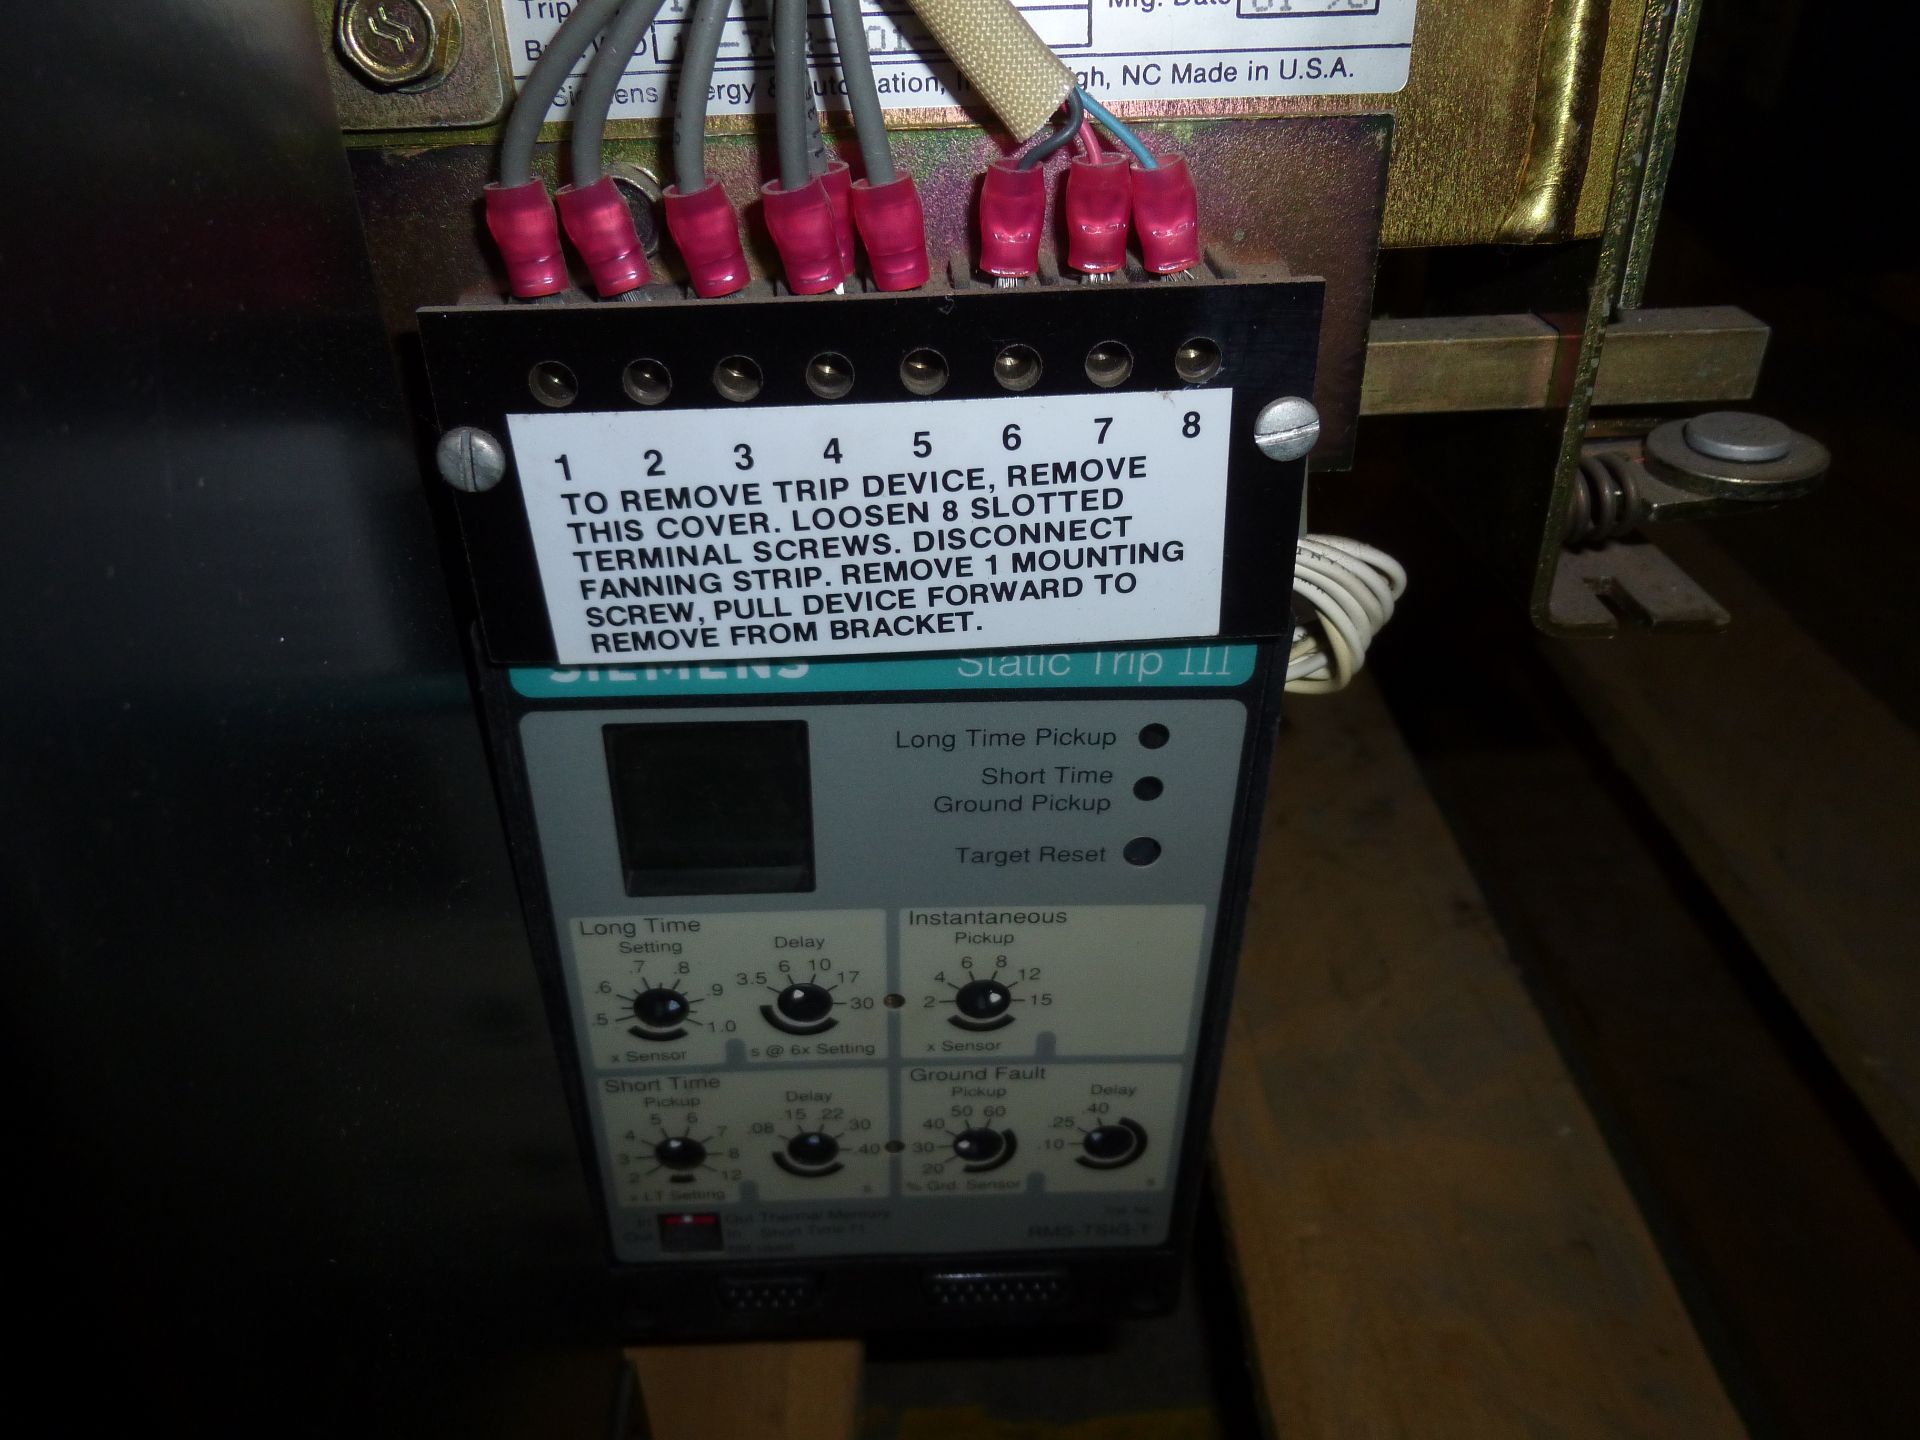 Siemens RLX-800 circuit breaker, 635v max, 800amp frame size with static trip III monitor - Image 4 of 4